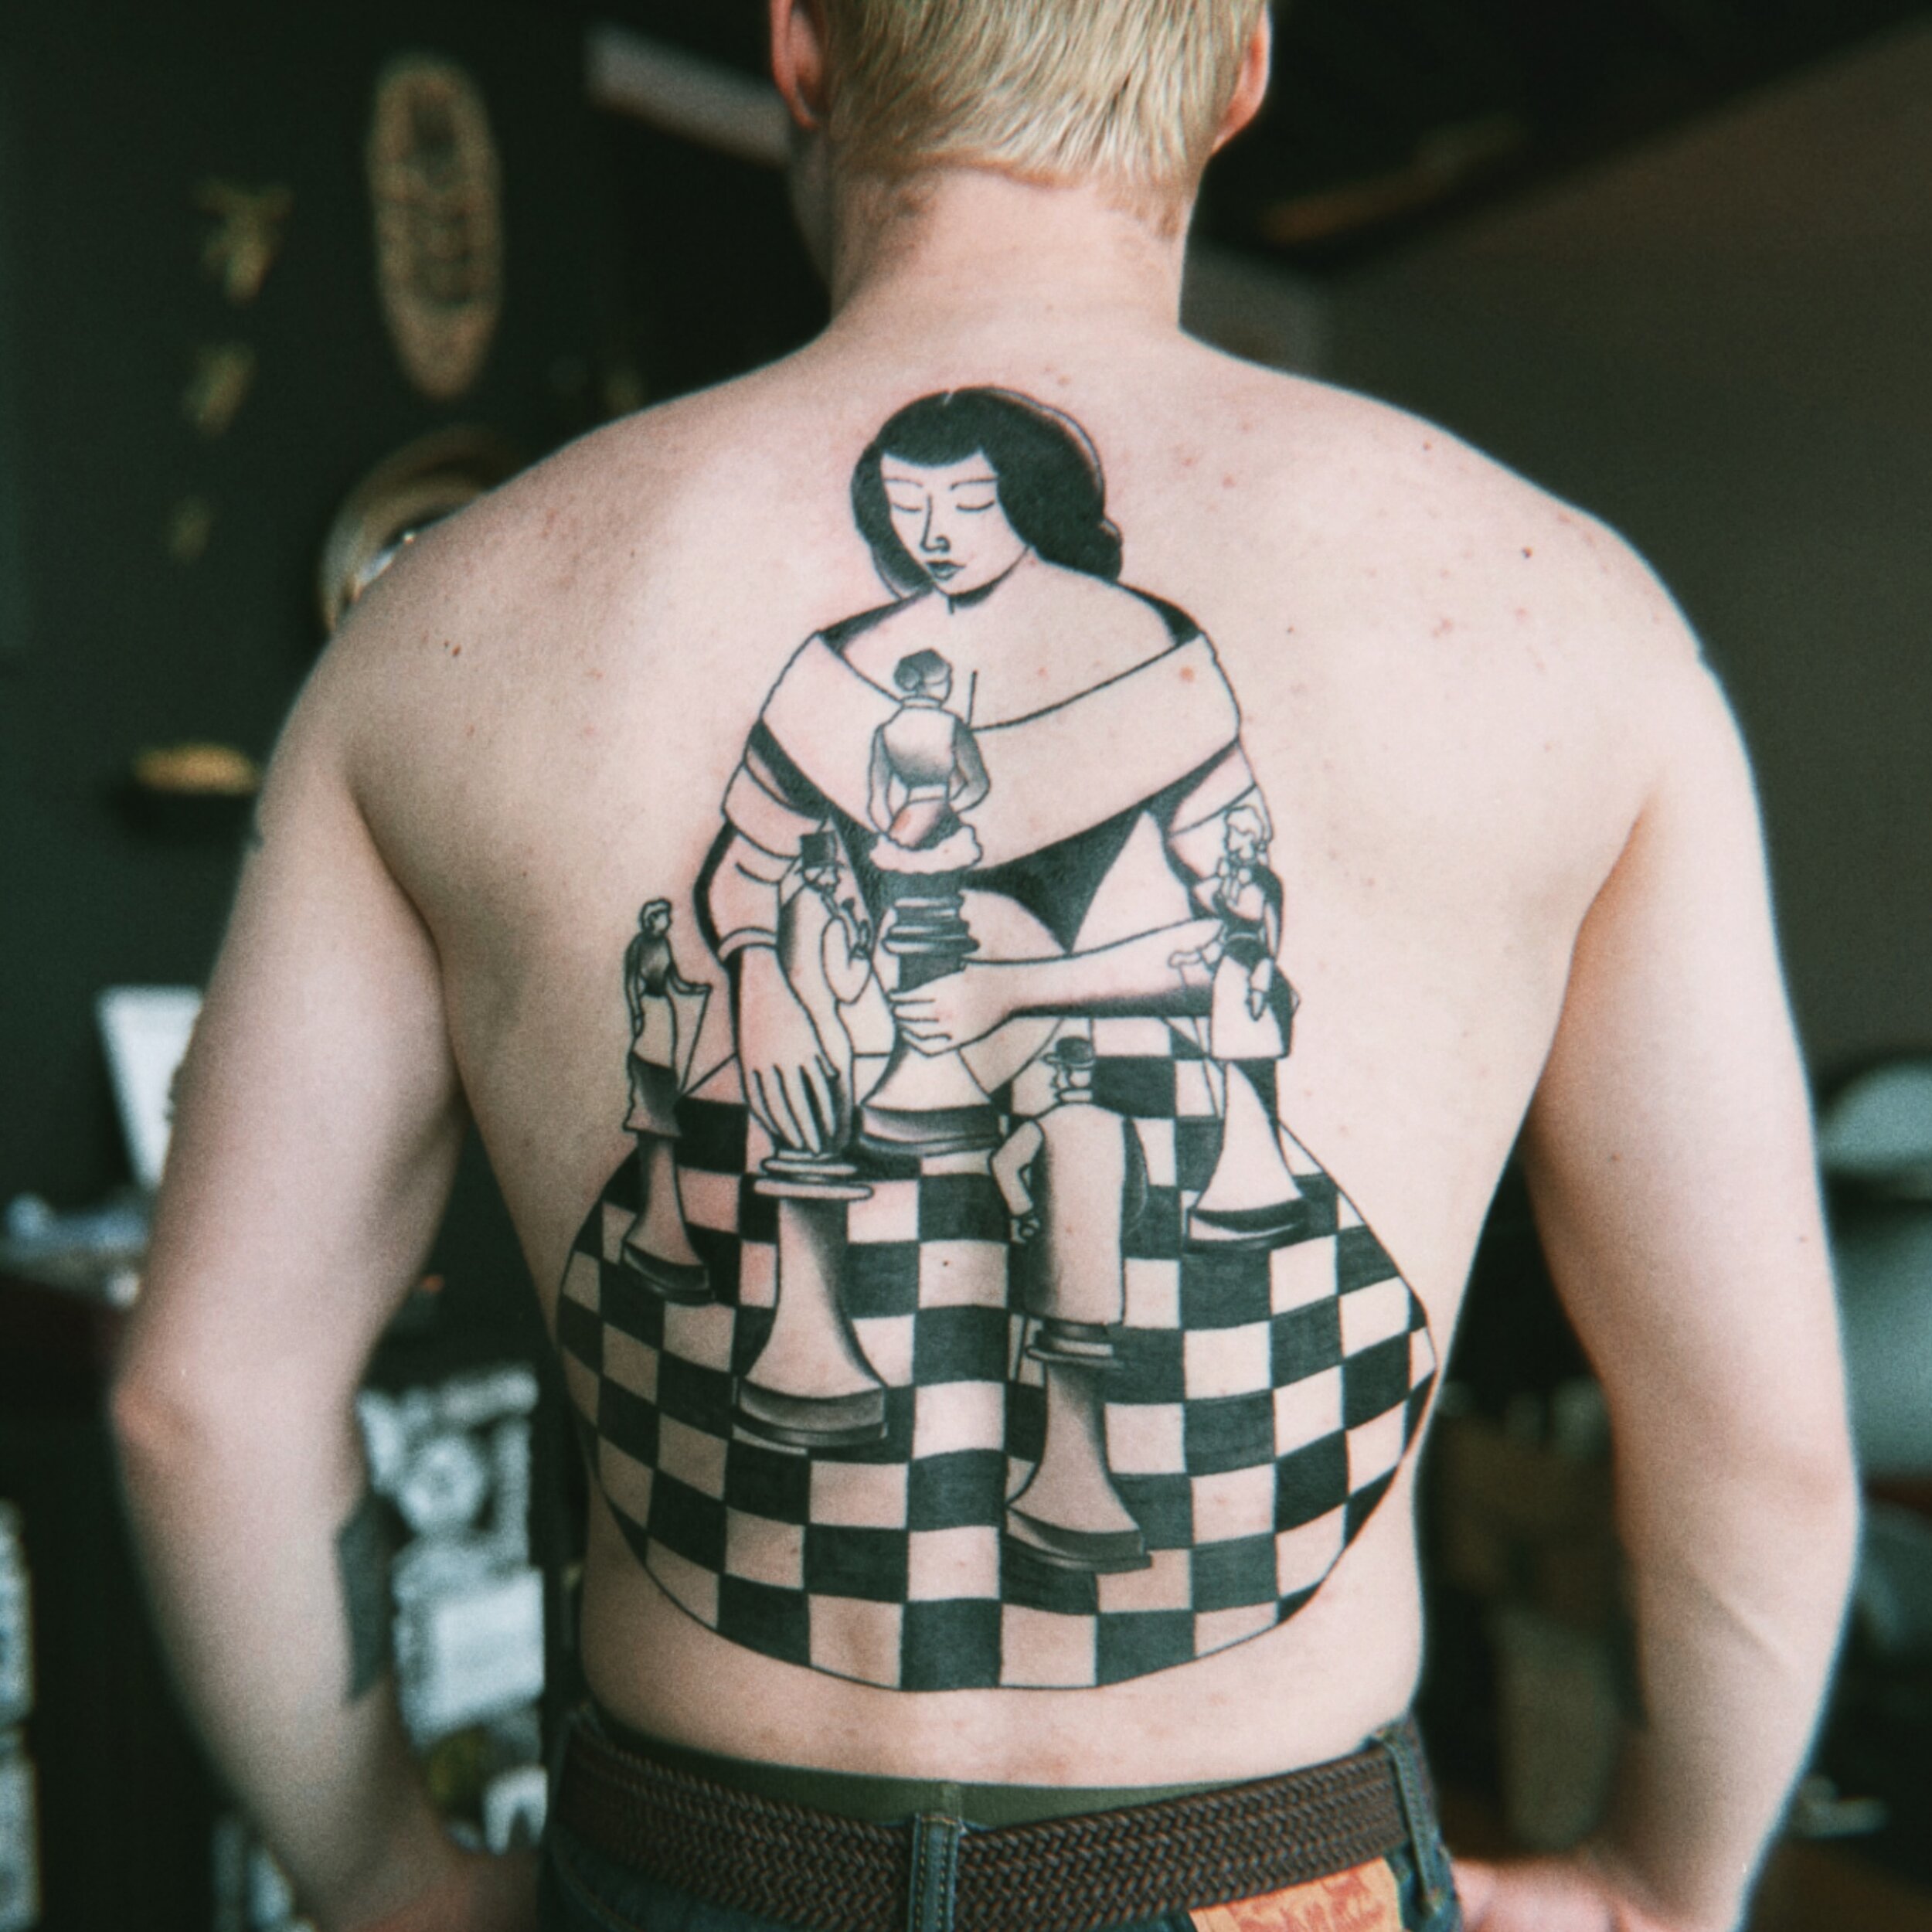 a throwback to my days at honest to goodness

#tiffytuffington #balmtattooing #grandrapidstattoo #backpiece